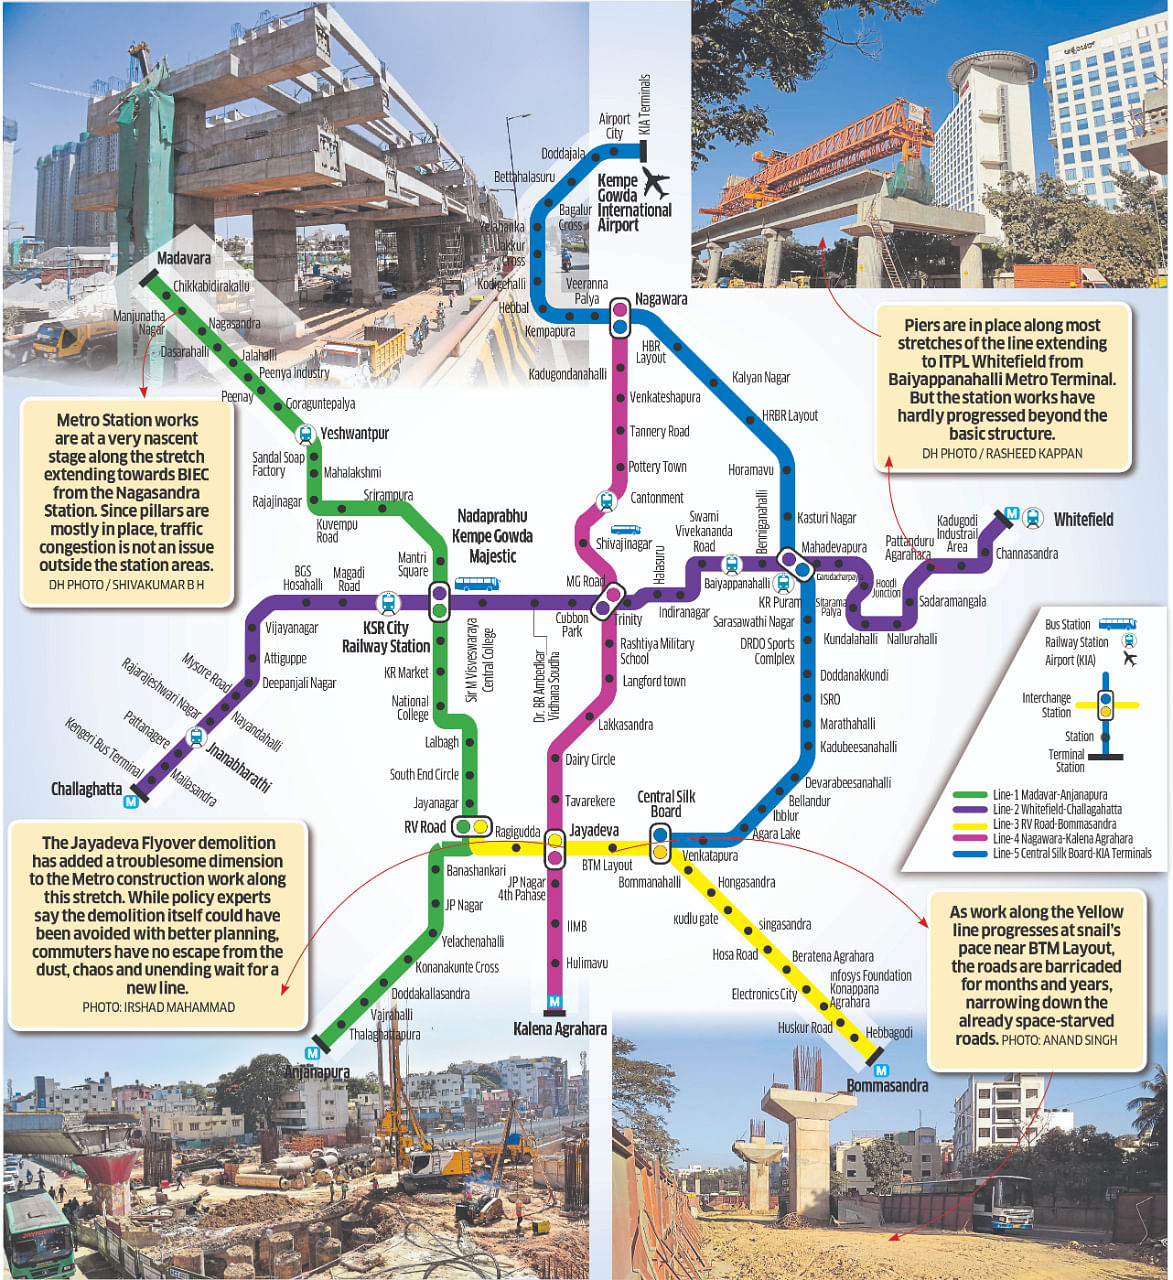 On paper, the Metro’s ORR agenda with stations at Agara, Iblur, Bellandur, Kadubeesanahalli, Marathahalli, ISRO, Doddanekkundi, DRDO Sports Complex, Saraswathipuram and K R Puram appears impressive. But commuters say they have been hearing about these for years, with nothing to show on the ground.